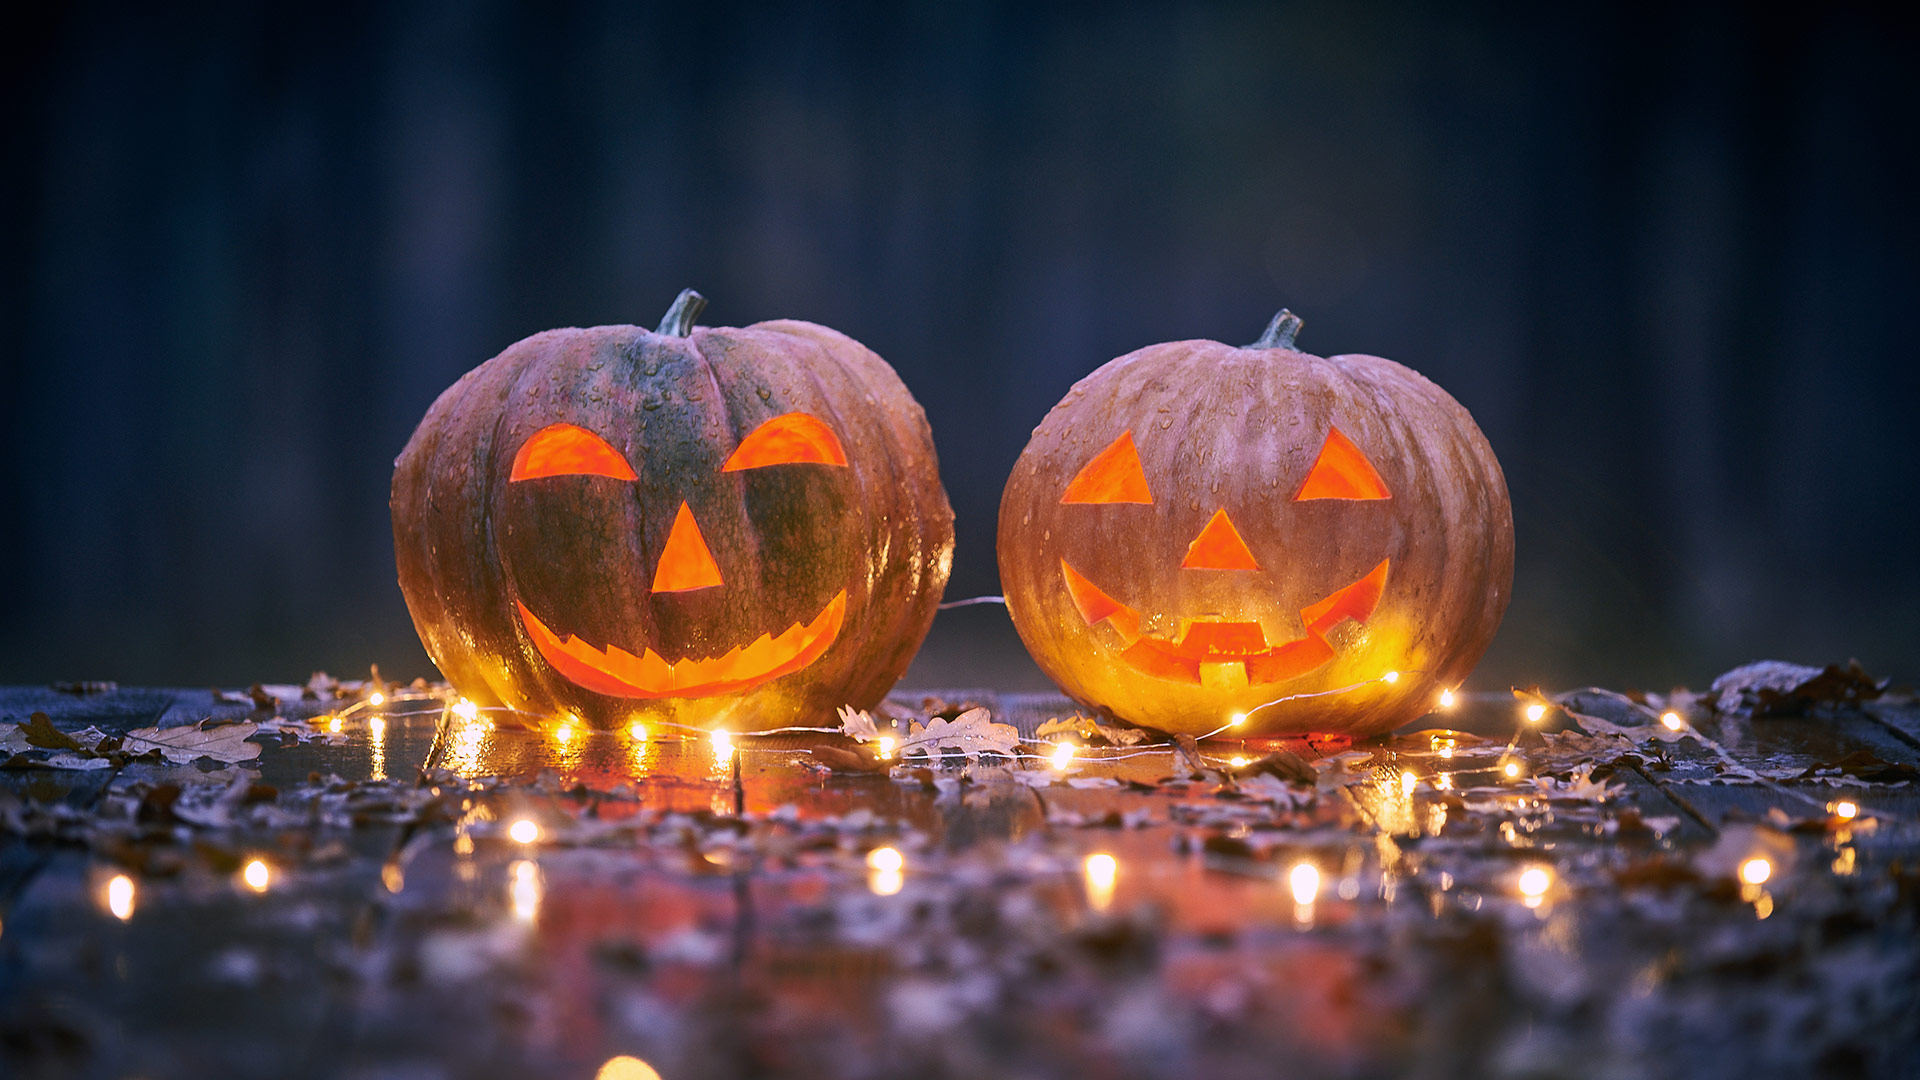 Two smiling Halloween pumpkins on a wooden table with lights In a mystic forest at night.